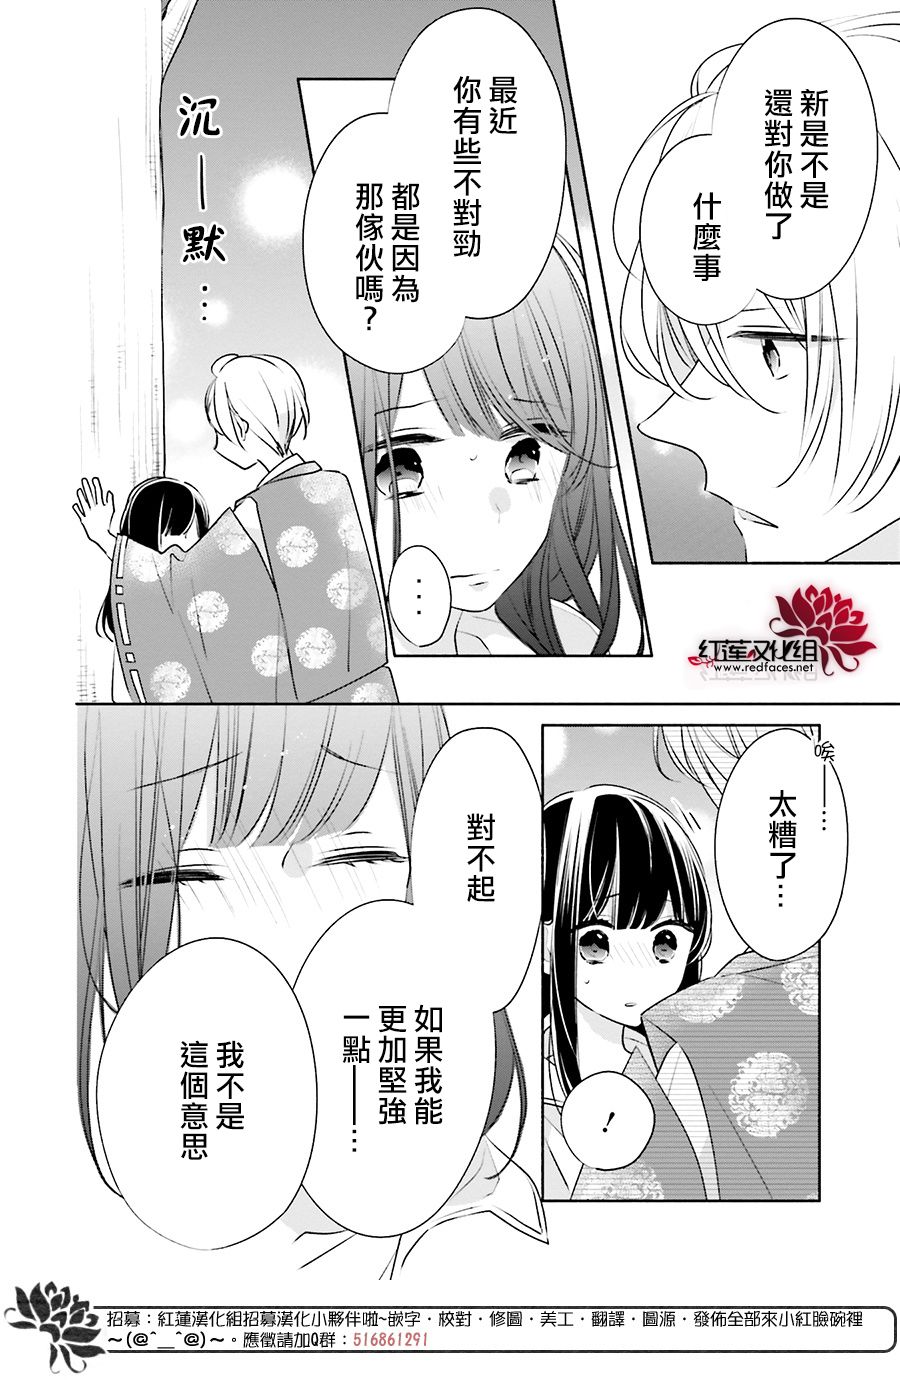 If given a second chance - 24話 - 5